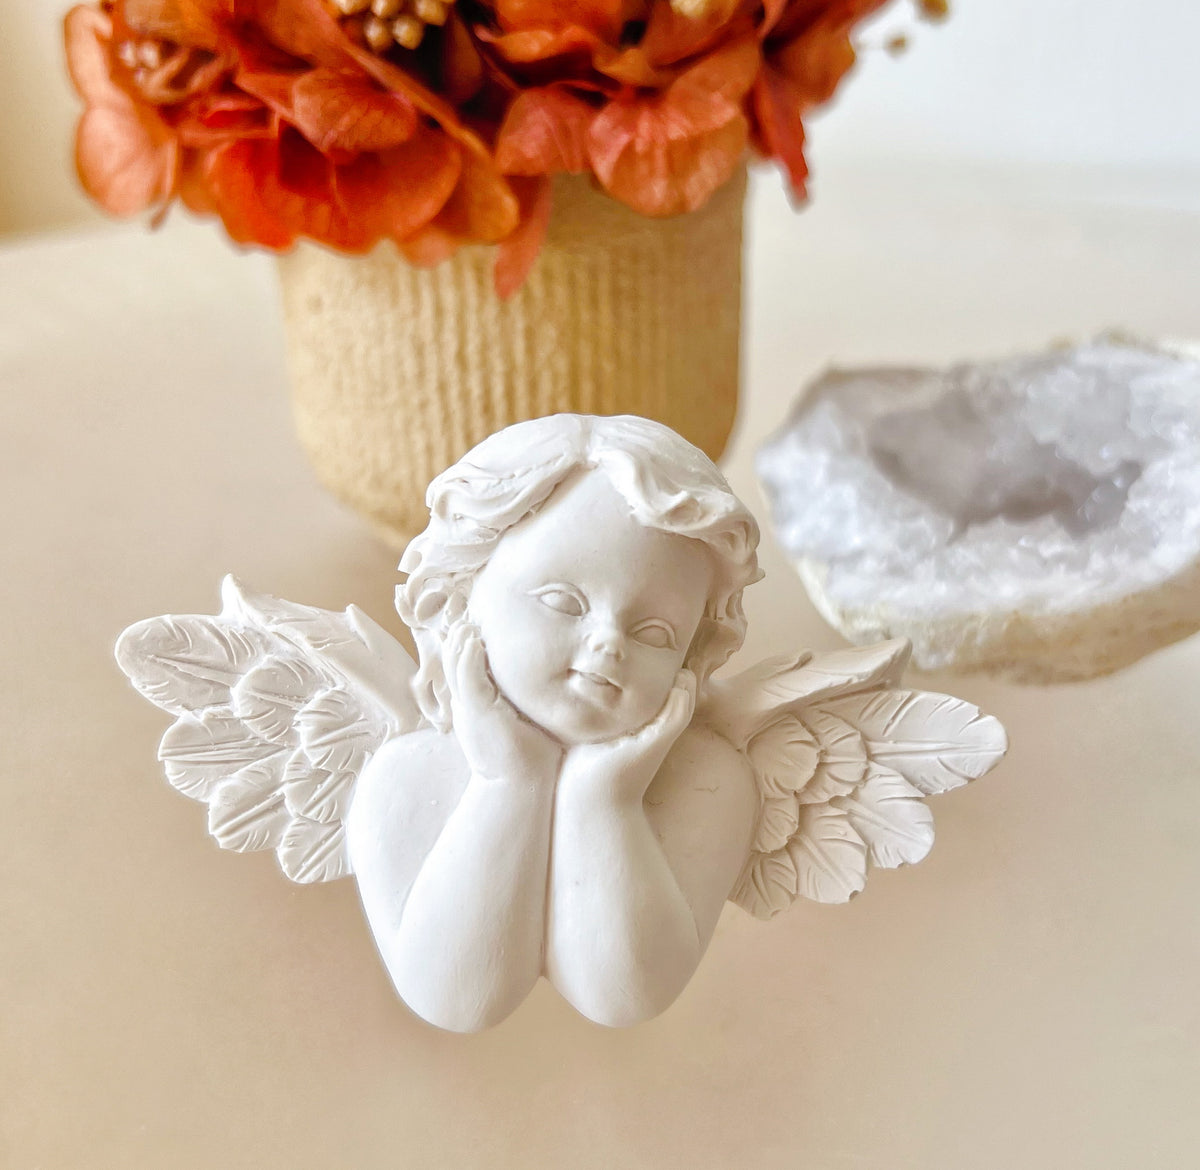 Cute Winged Angel Car Vent Air Freshener Clips - LMJ Candles